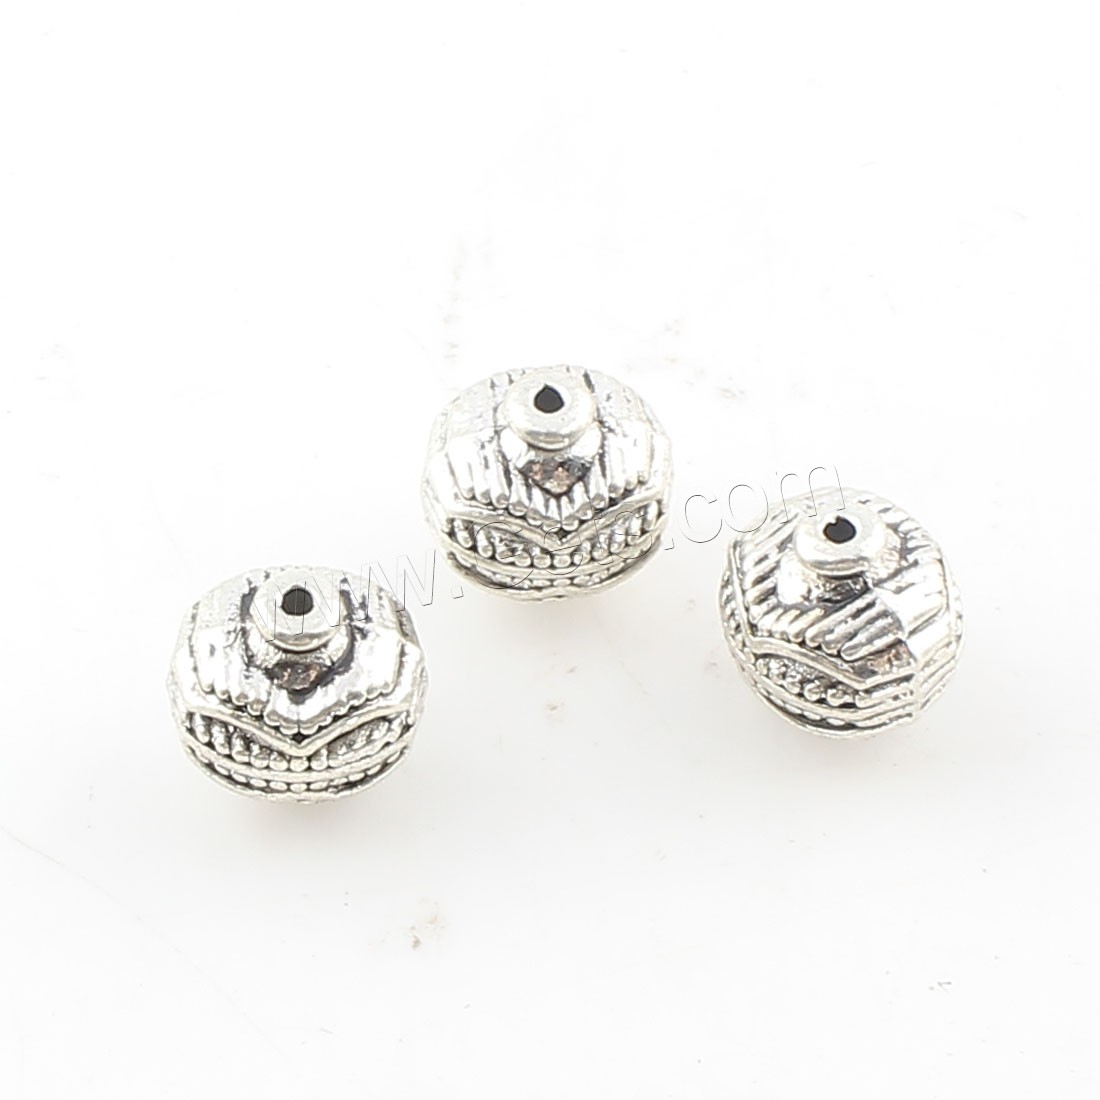 Zinc Alloy Jewelry Beads, plated, more colors for choice, 10x9x8mm, Hole:Approx 1mm, Approx 249PCs/Bag, Sold By Bag